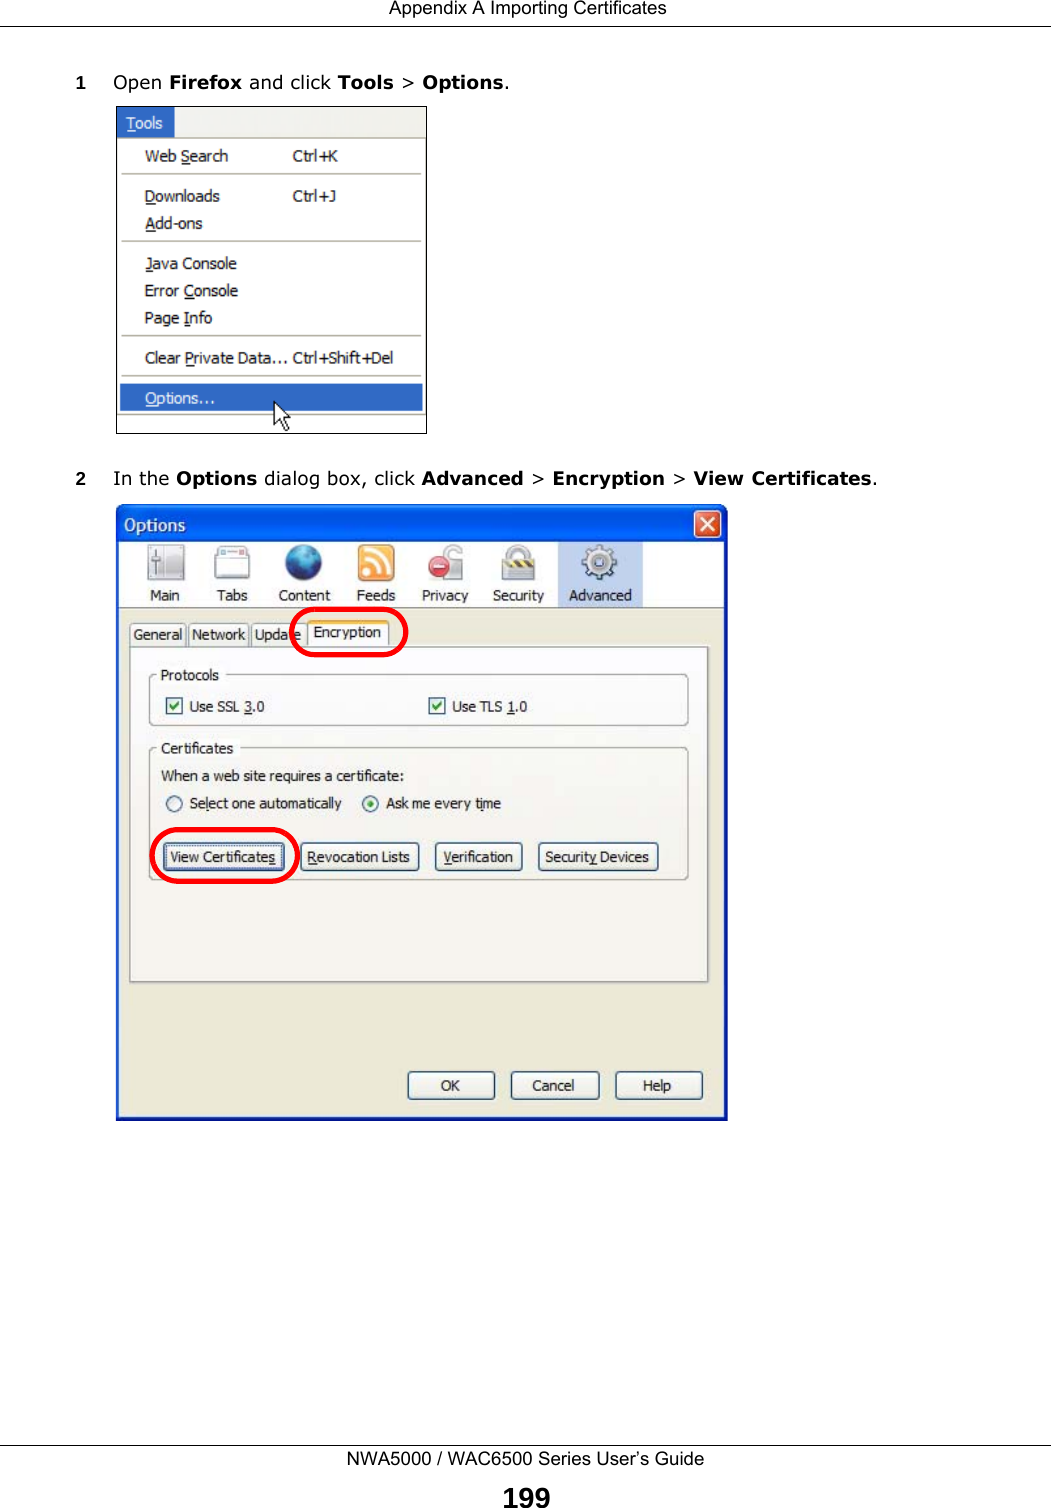  Appendix A Importing CertificatesNWA5000 / WAC6500 Series User’s Guide1991Open Firefox and click Tools &gt; Options.2In the Options dialog box, click Advanced &gt; Encryption &gt; View Certificates.